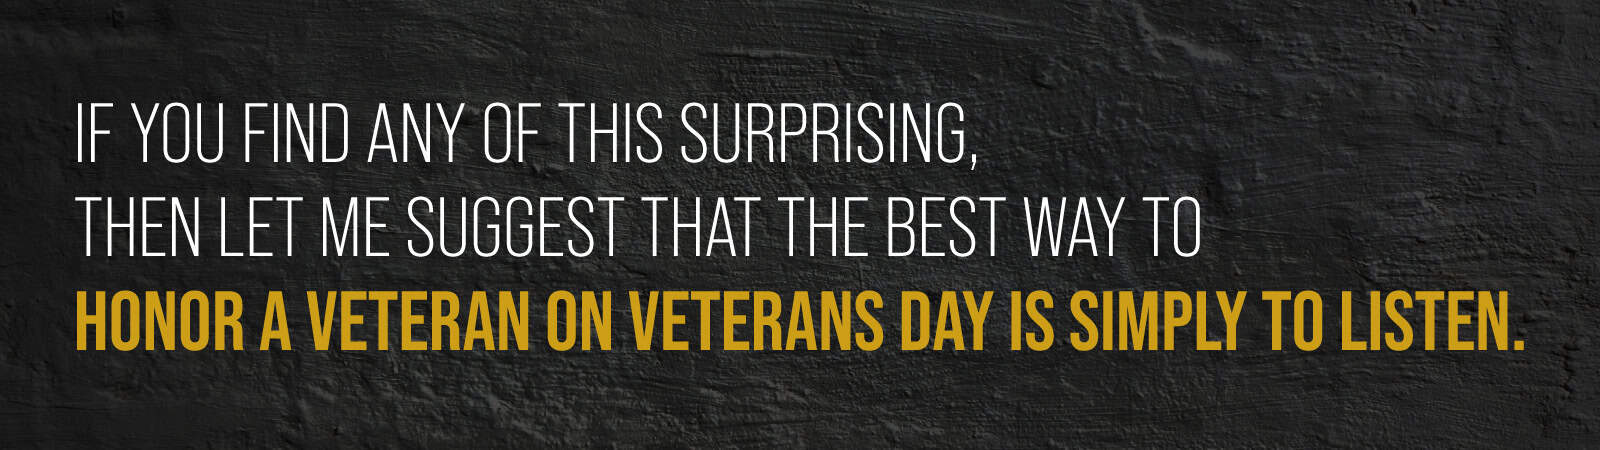  The best way to honor a veteran on Veterans Day is simply to listen. 